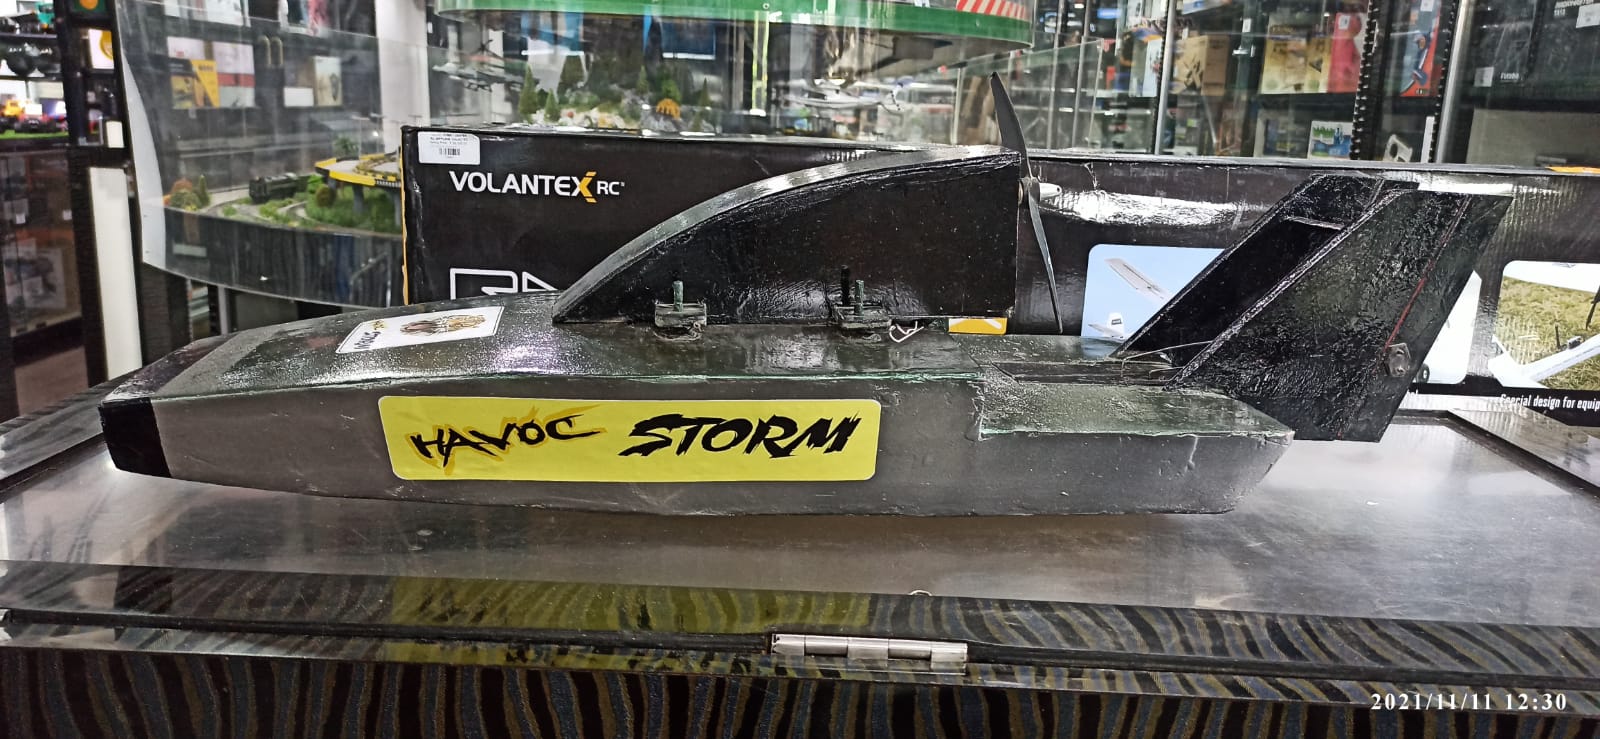 HAVOC STORM RC BOAT BE07 DARK GREEN (QUALITY PRE OWNED)